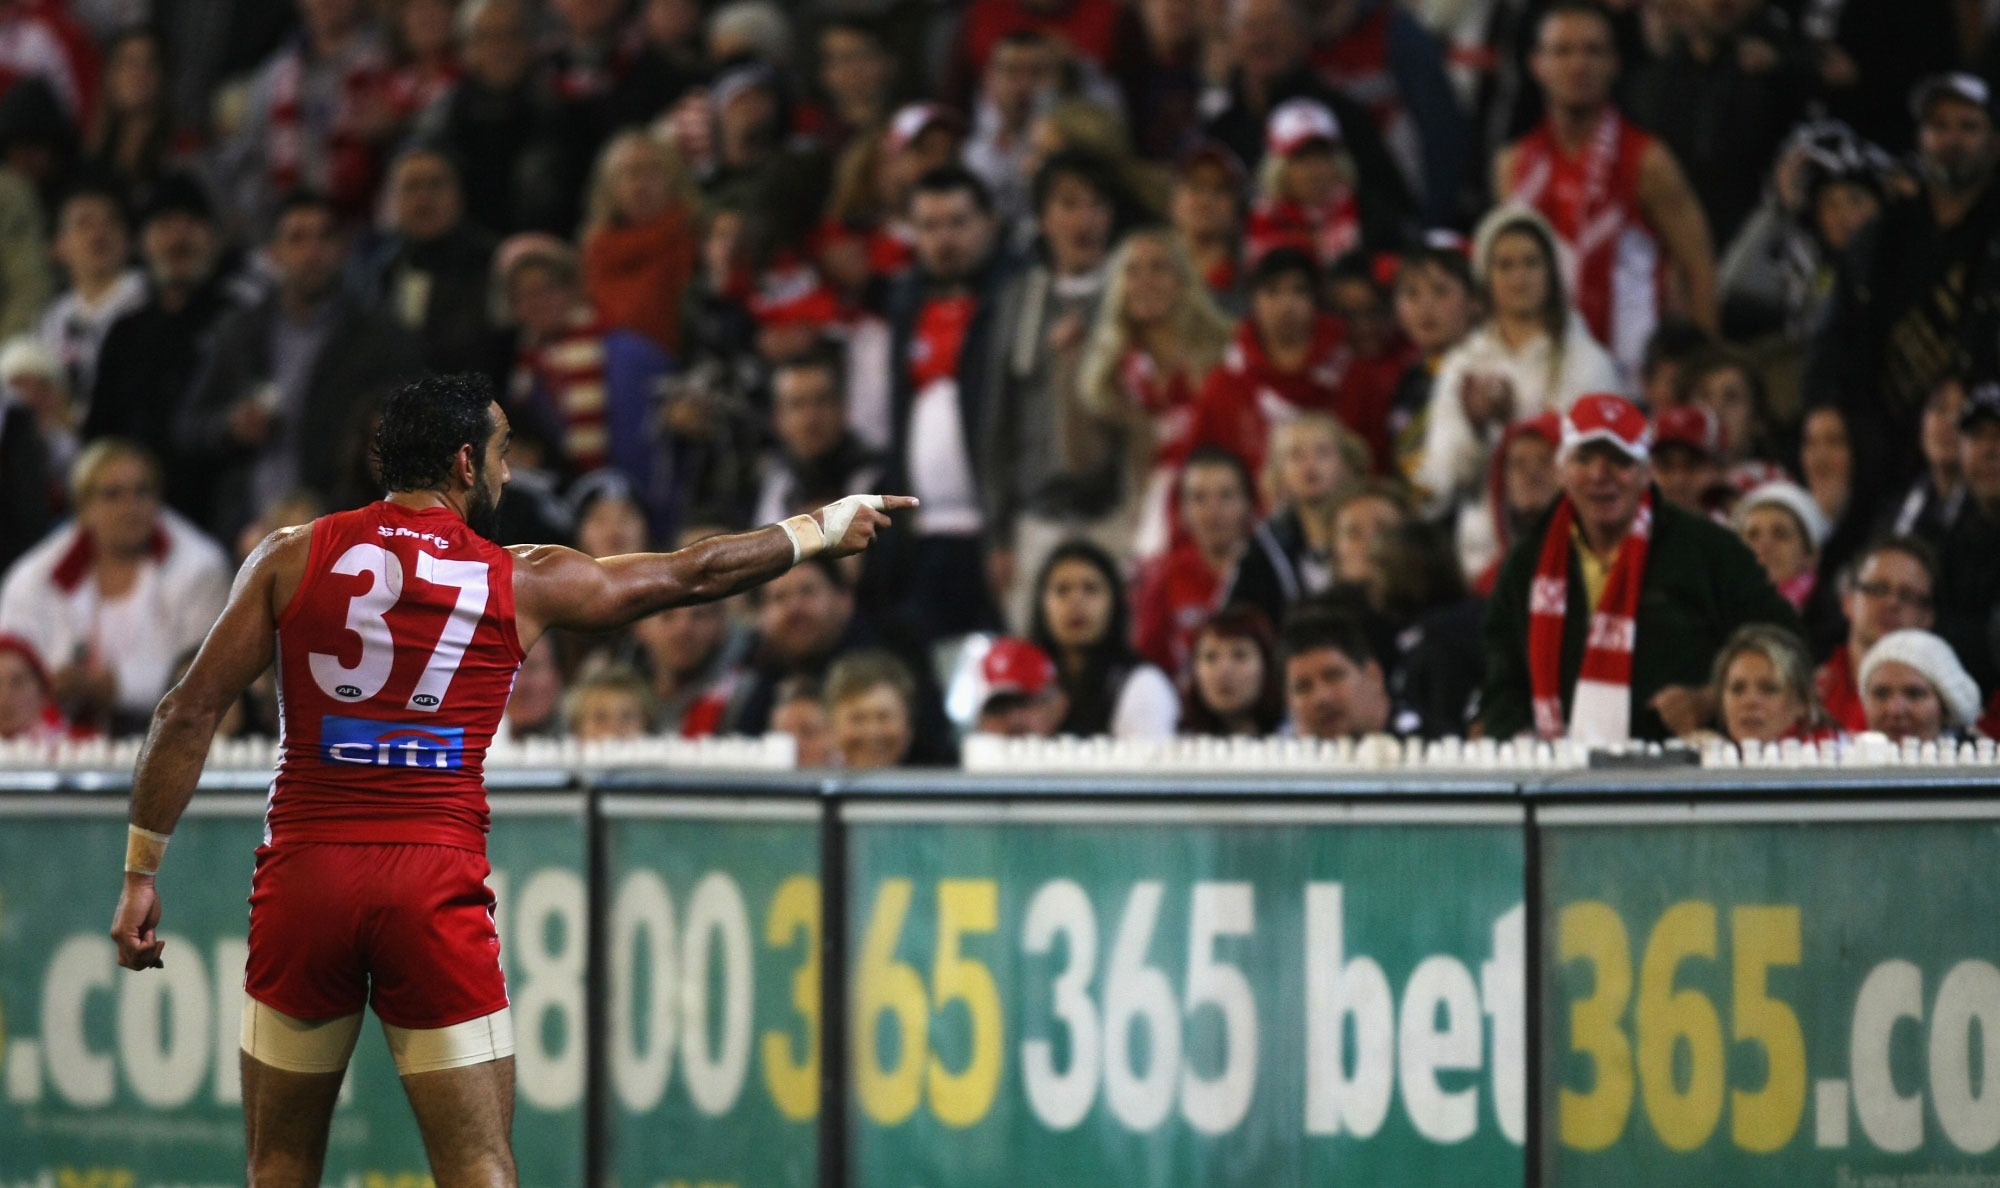 Adam Goodes points out a spectator who made racist comments about him, 24 May 2013.